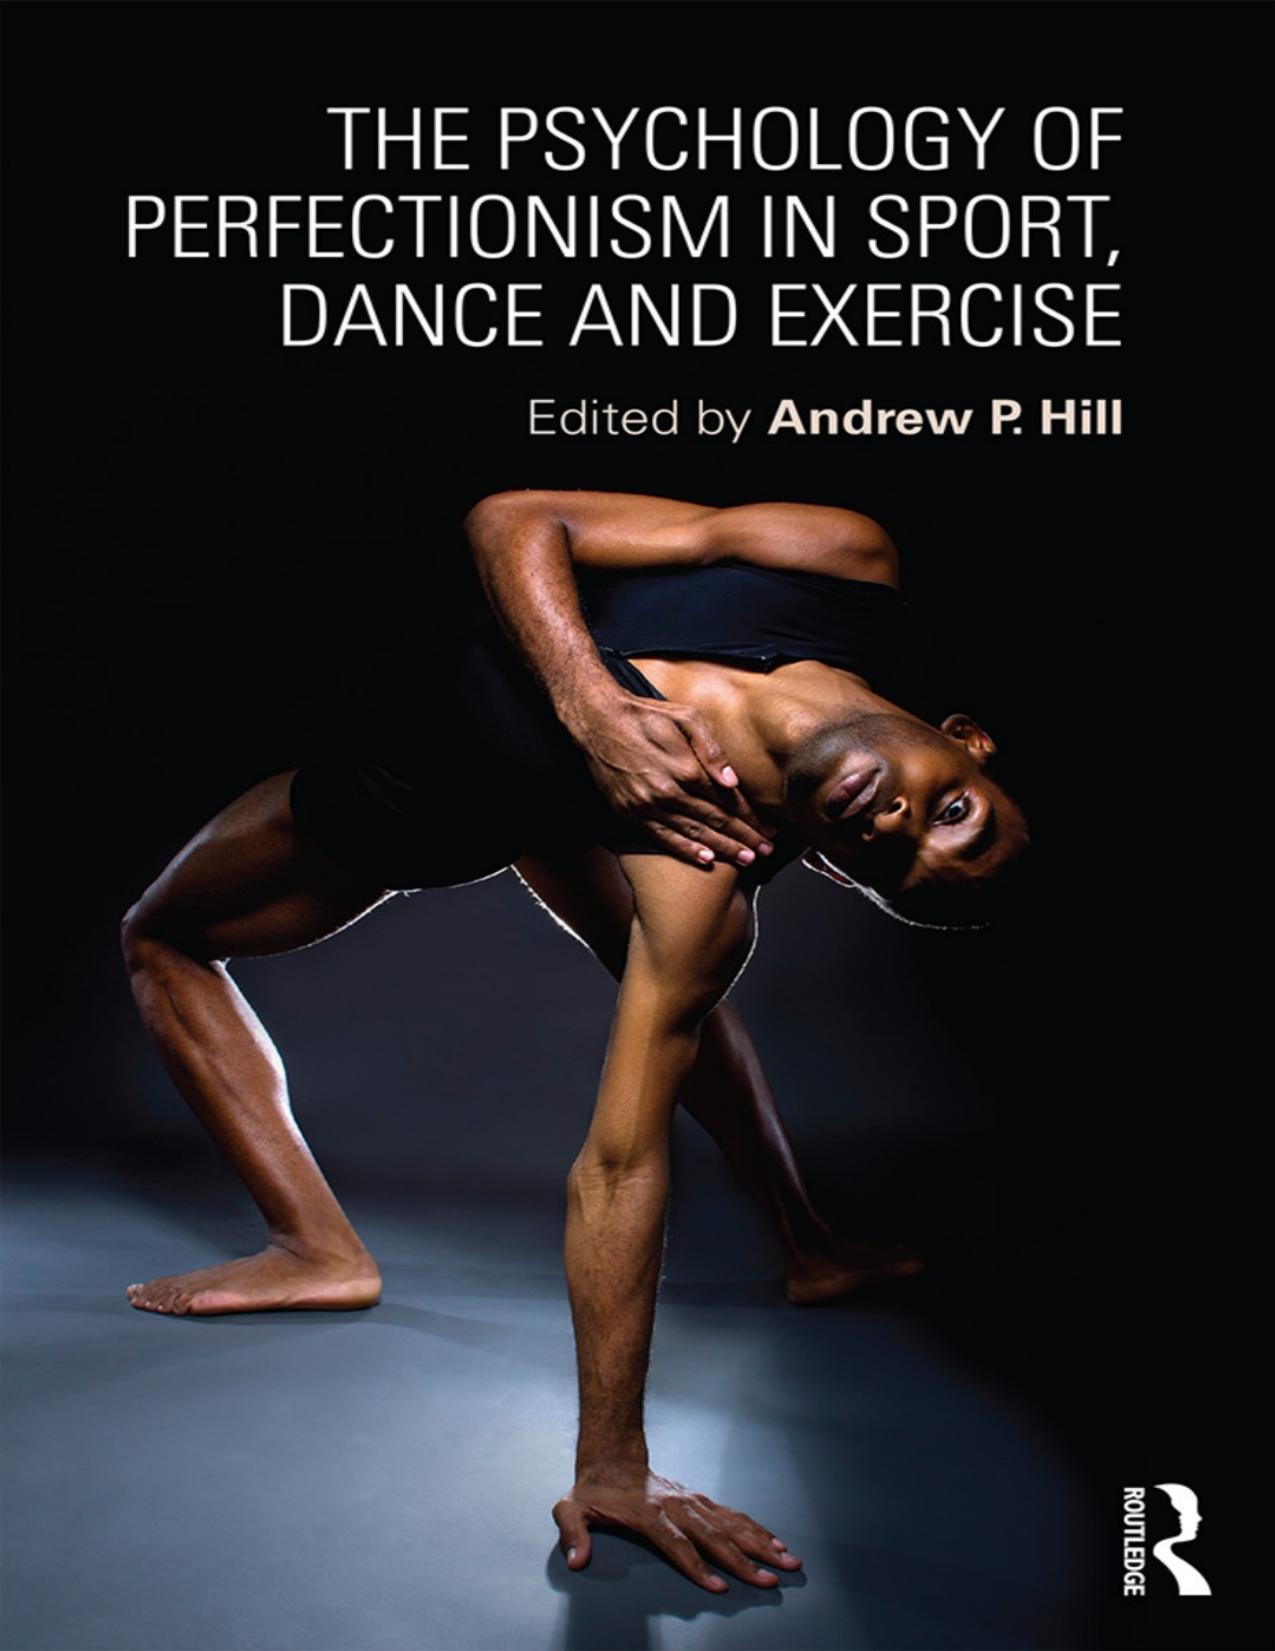 The Psychology of Perfectionism in Sport, Dance and Exercise - PDFDrive.com